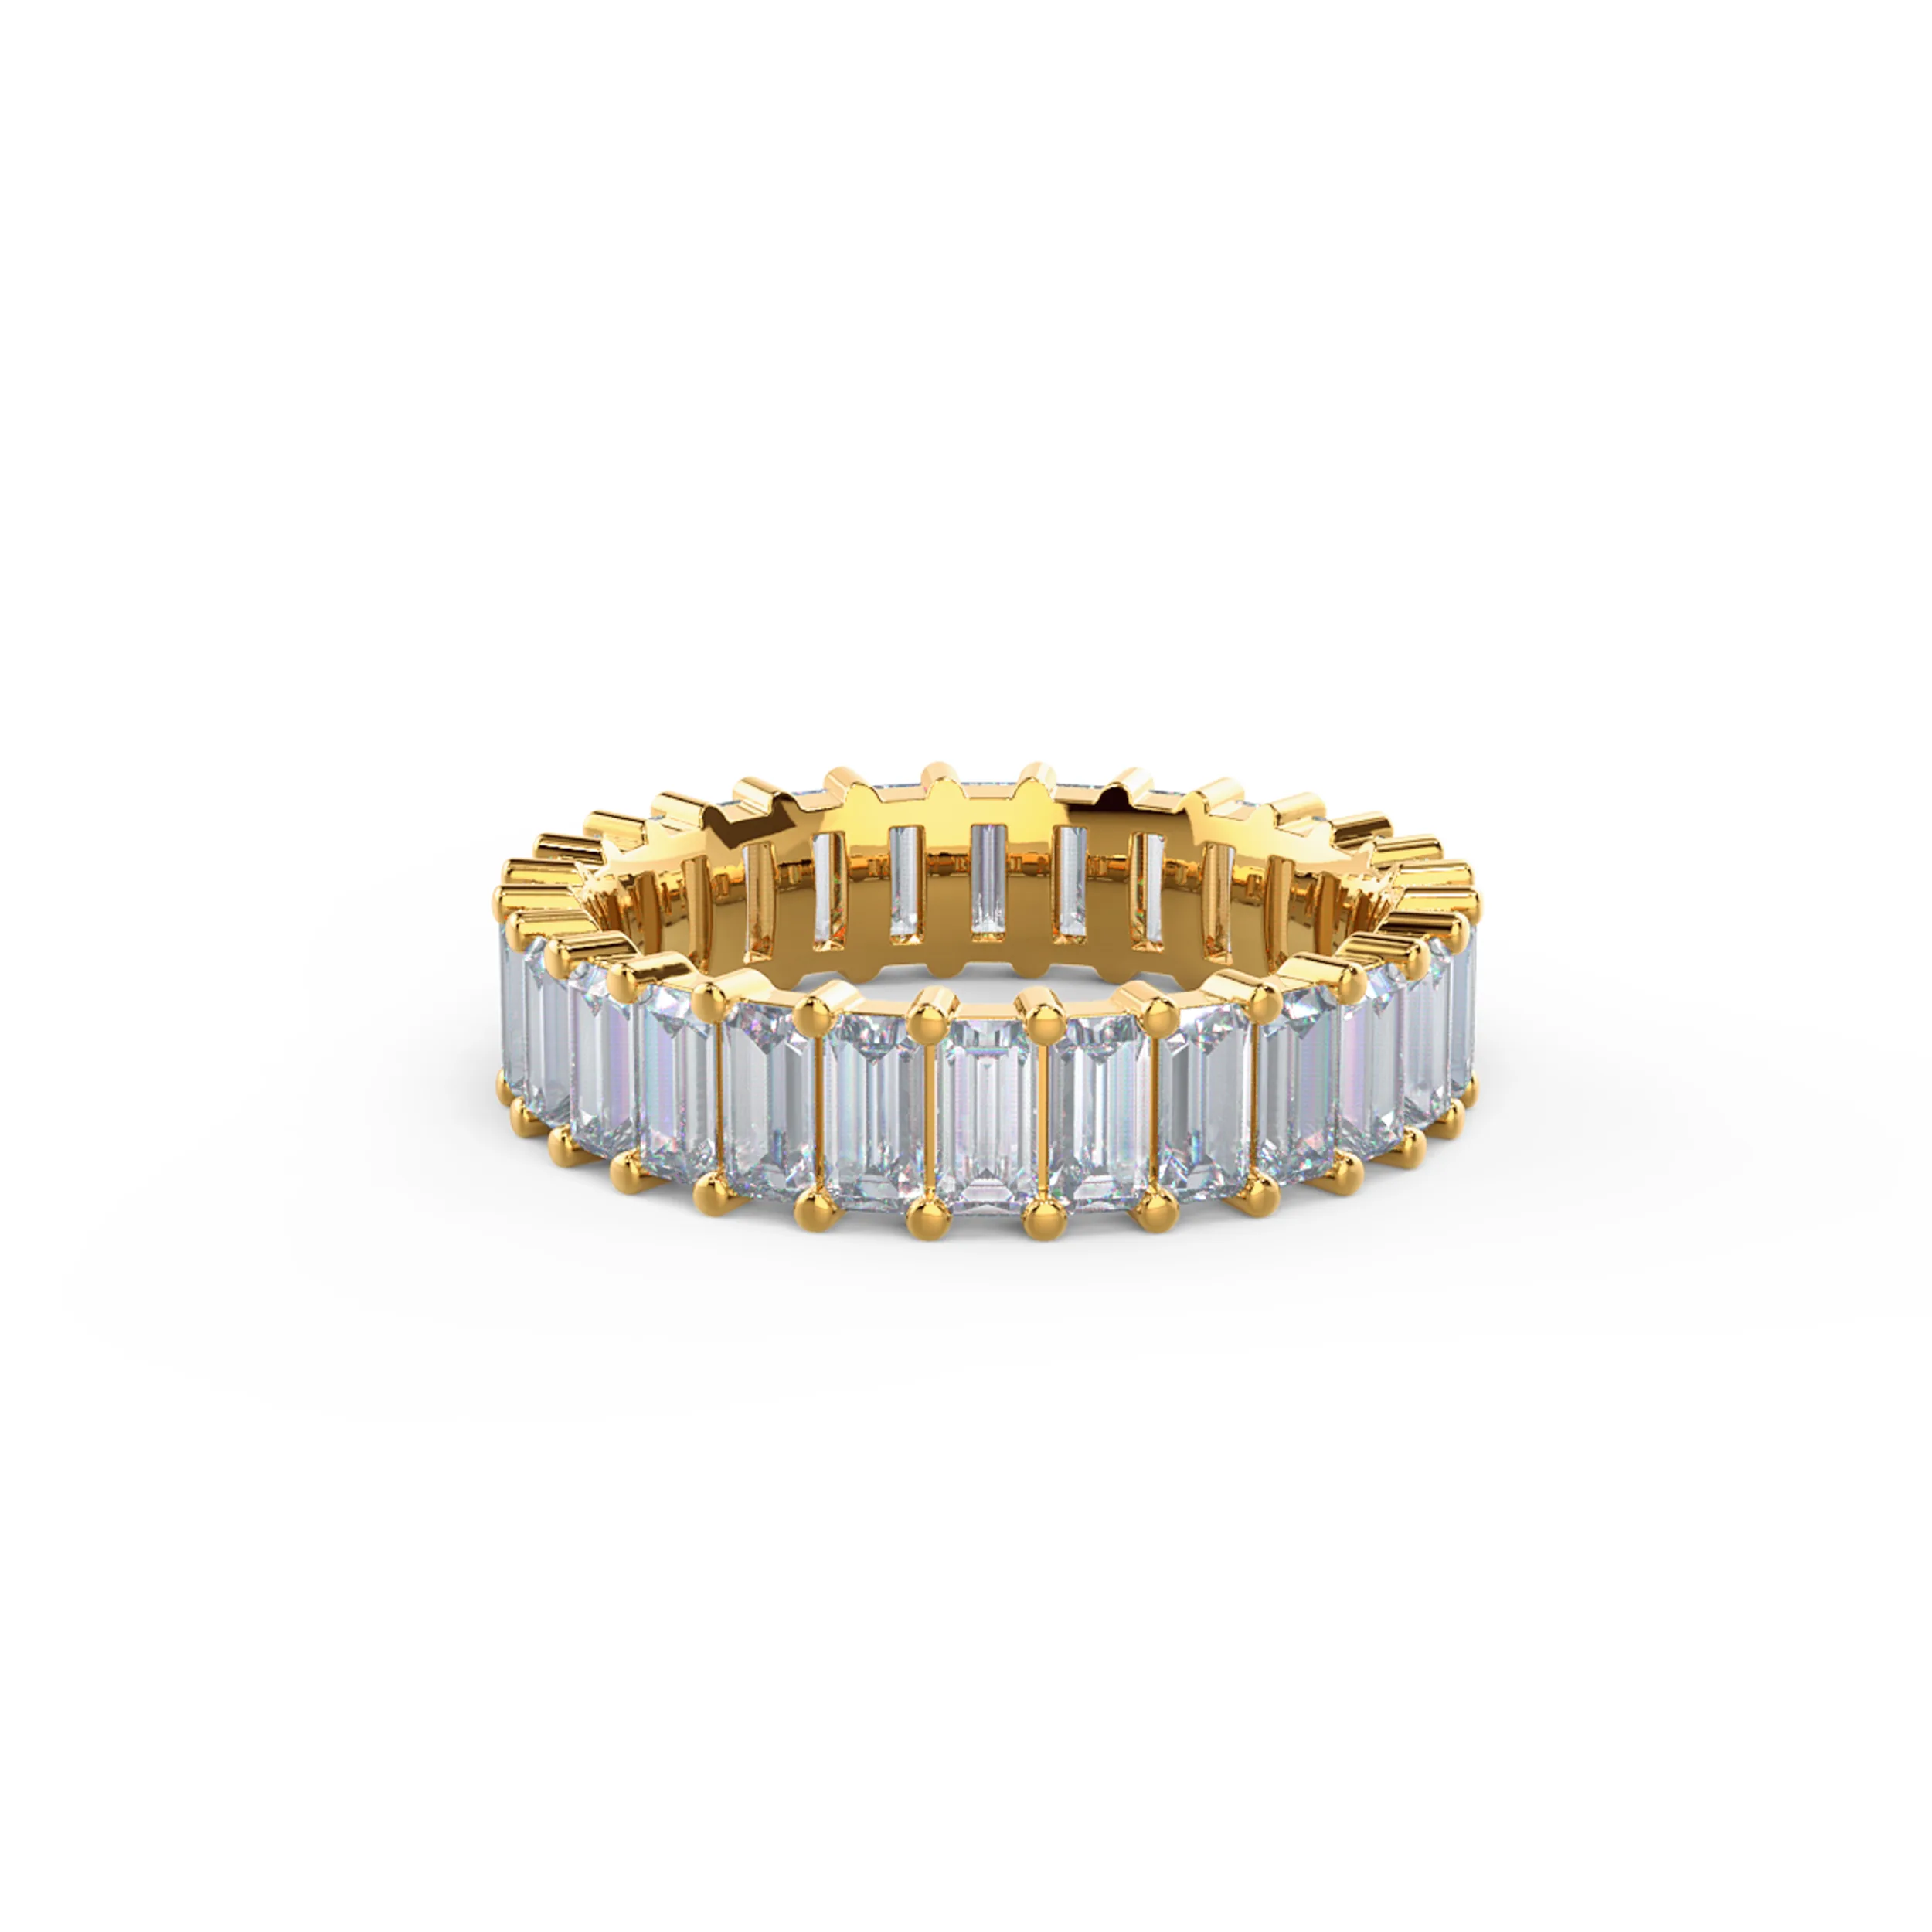 Exceptional Quality 2.8 ctw Diamonds Baguette Eternity Band in 18k Yellow Gold (Main View)